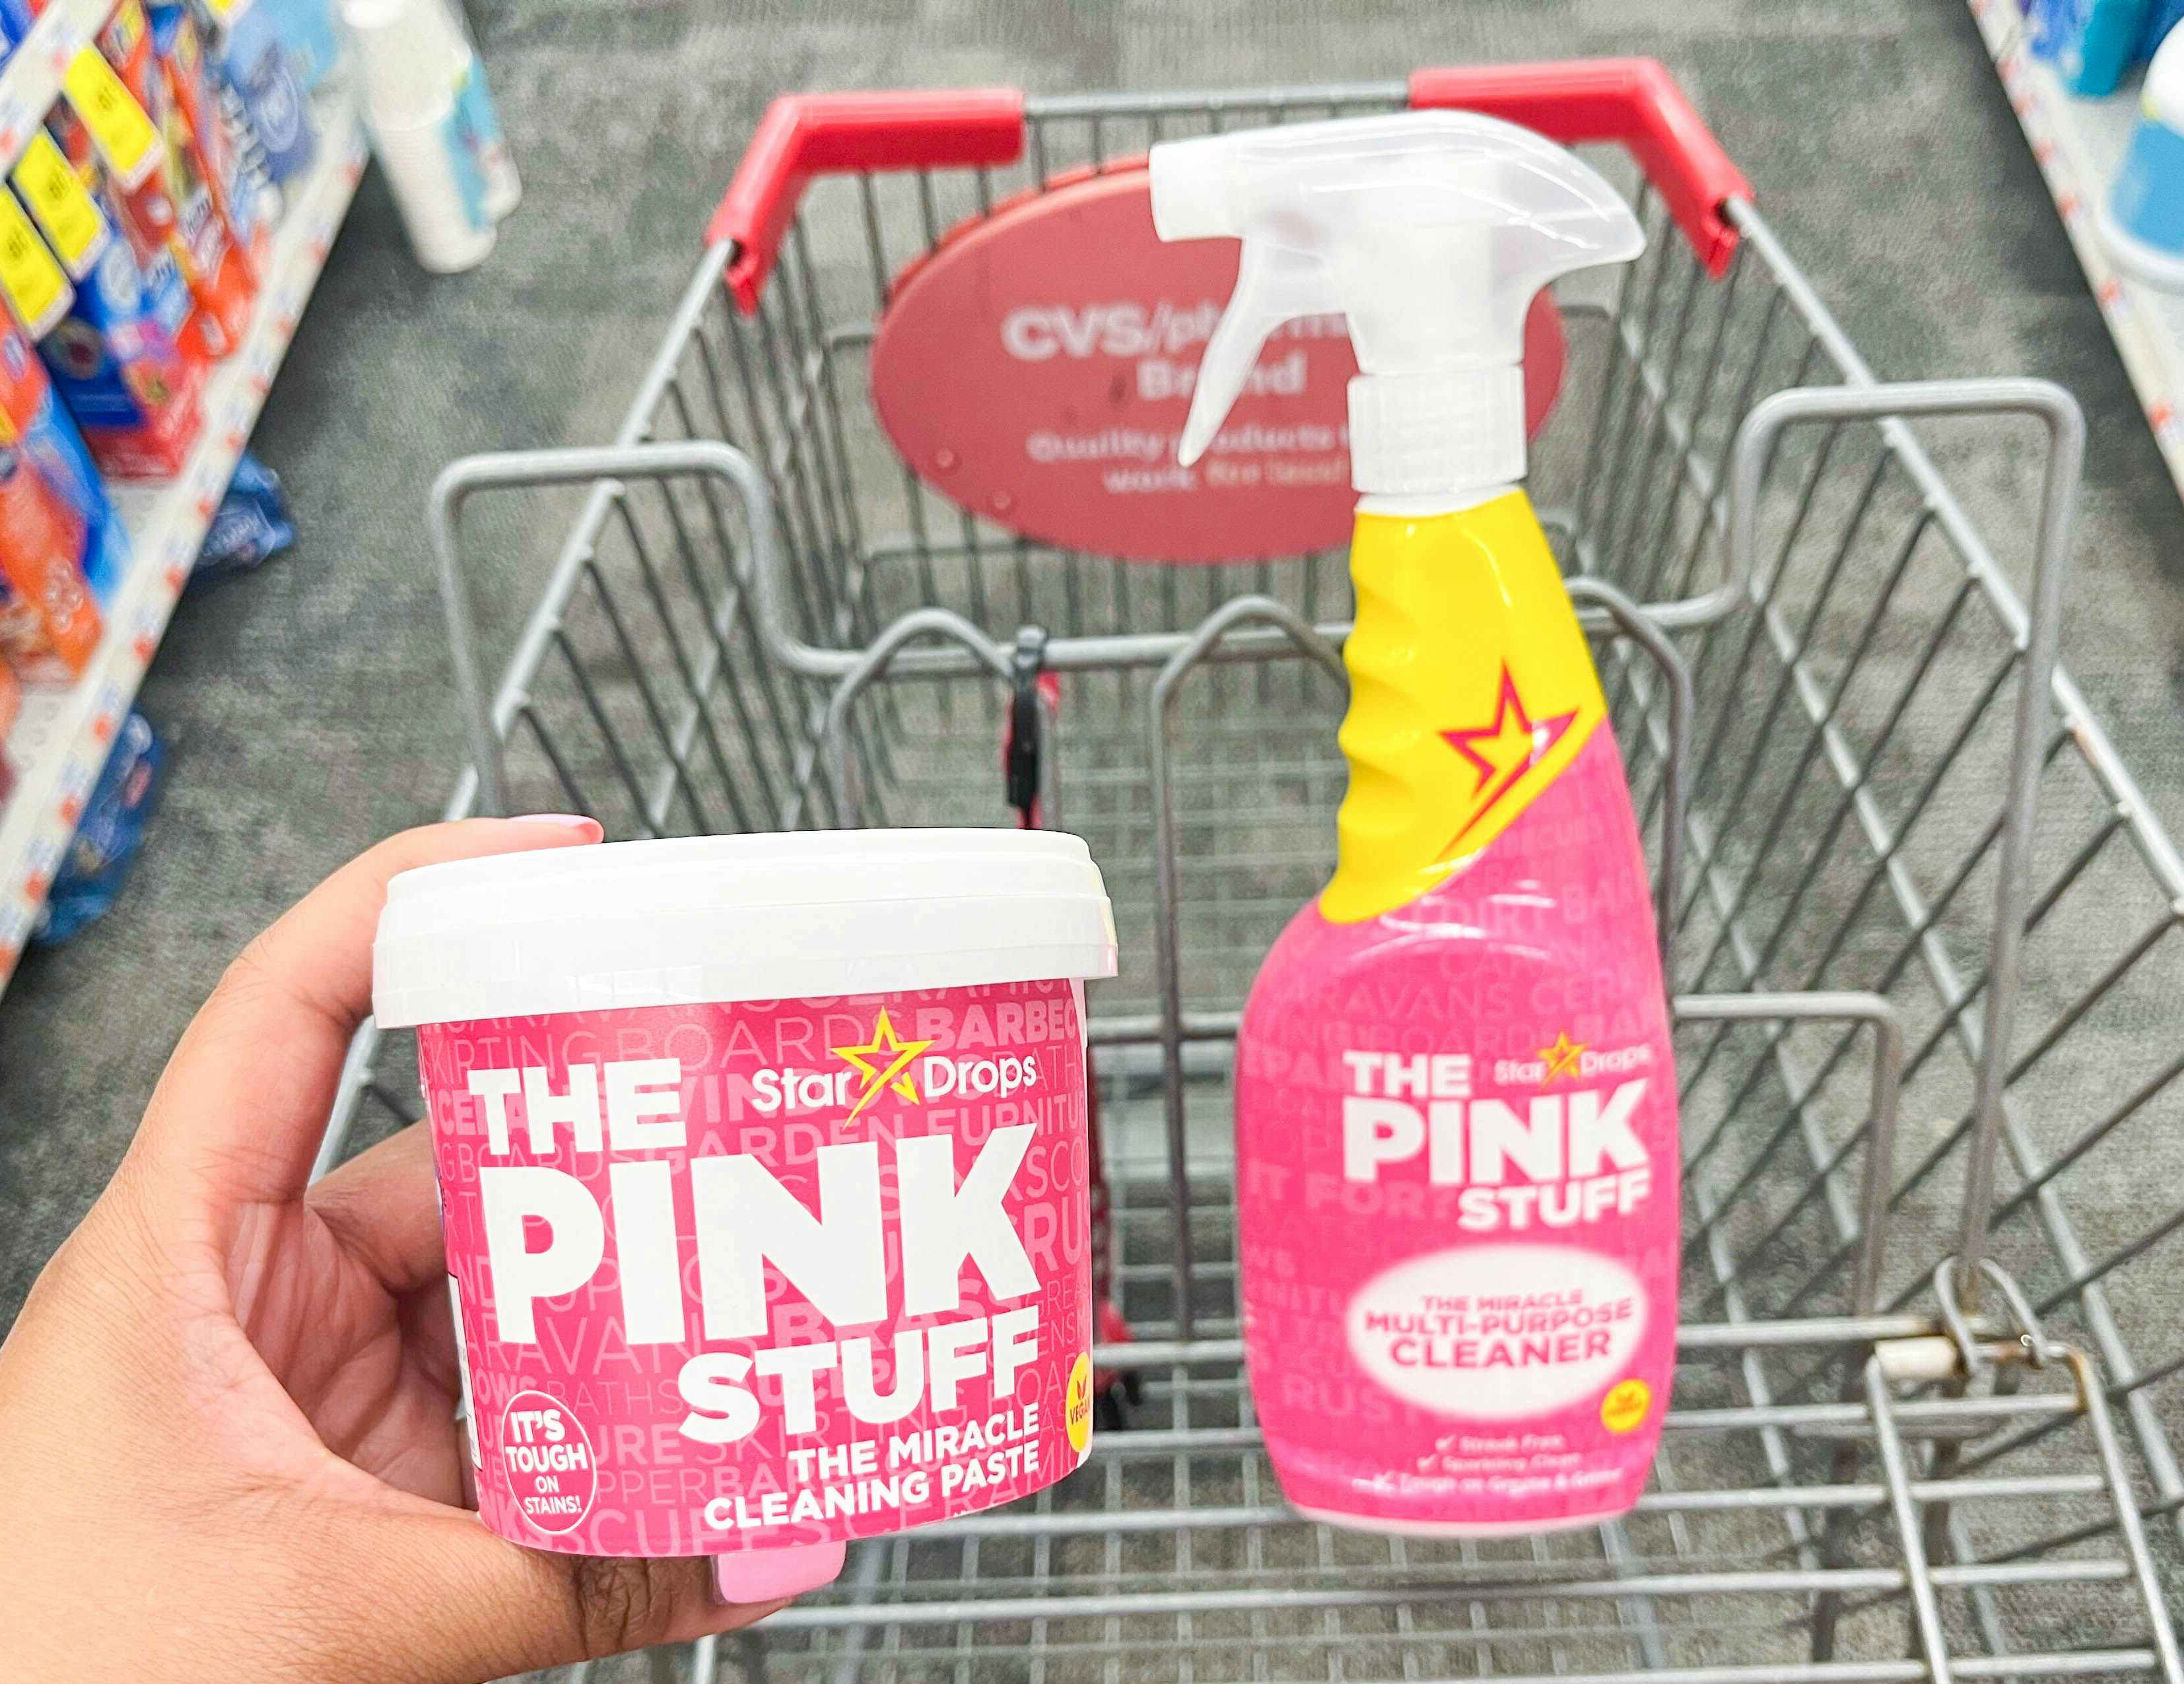 cvs-the-pink-stuff-cleaning-paste-multi-purpose-cleaner-spray-2023